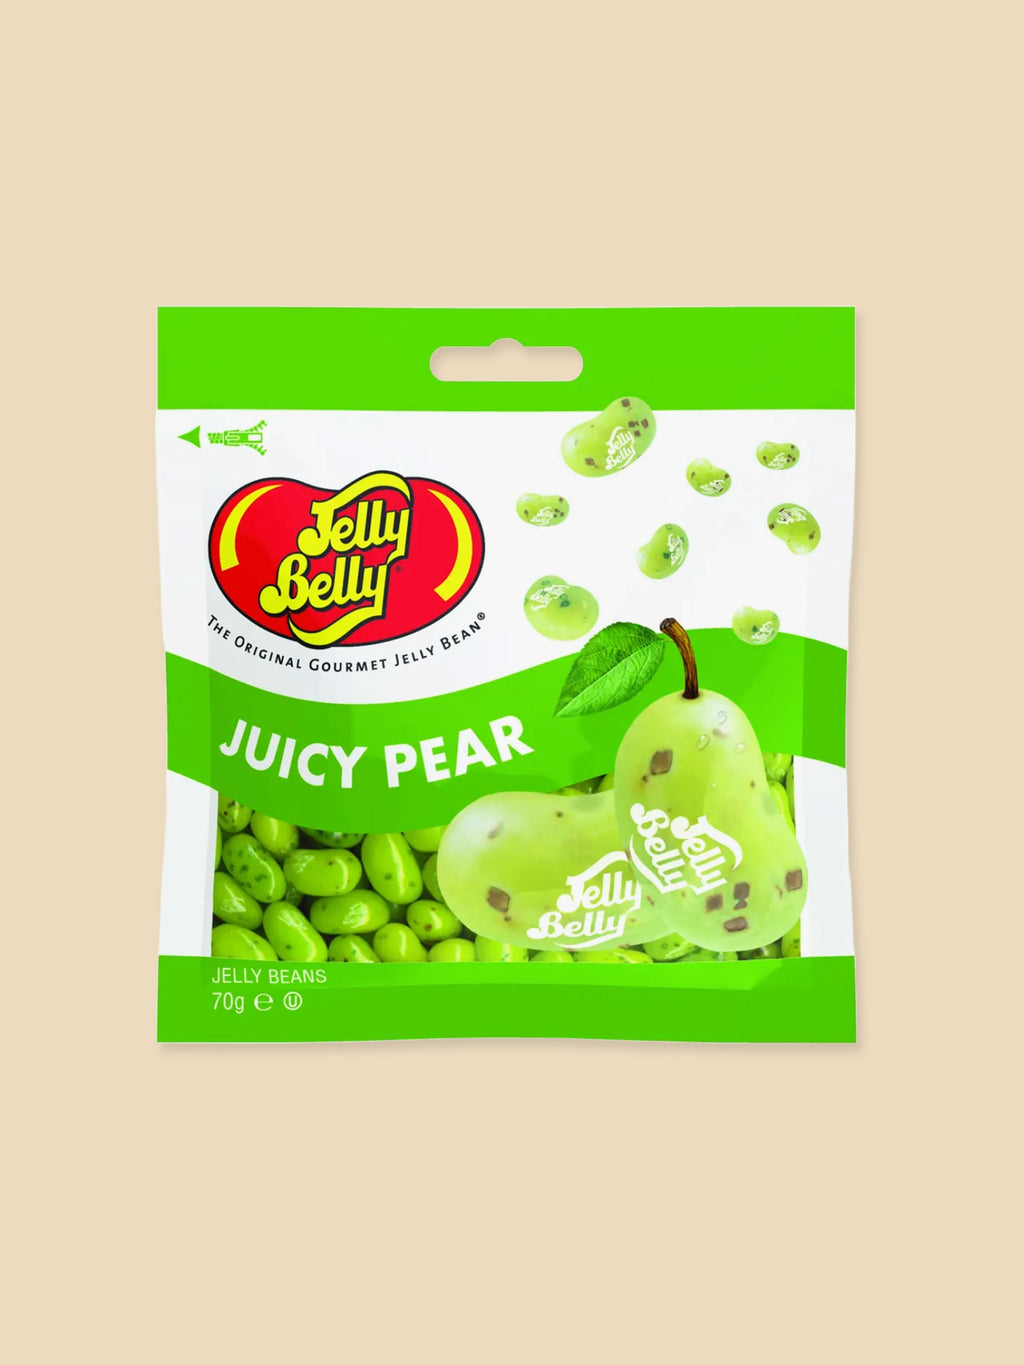 Jelly Belly Jelly Beans - Juicy Pear - 70g